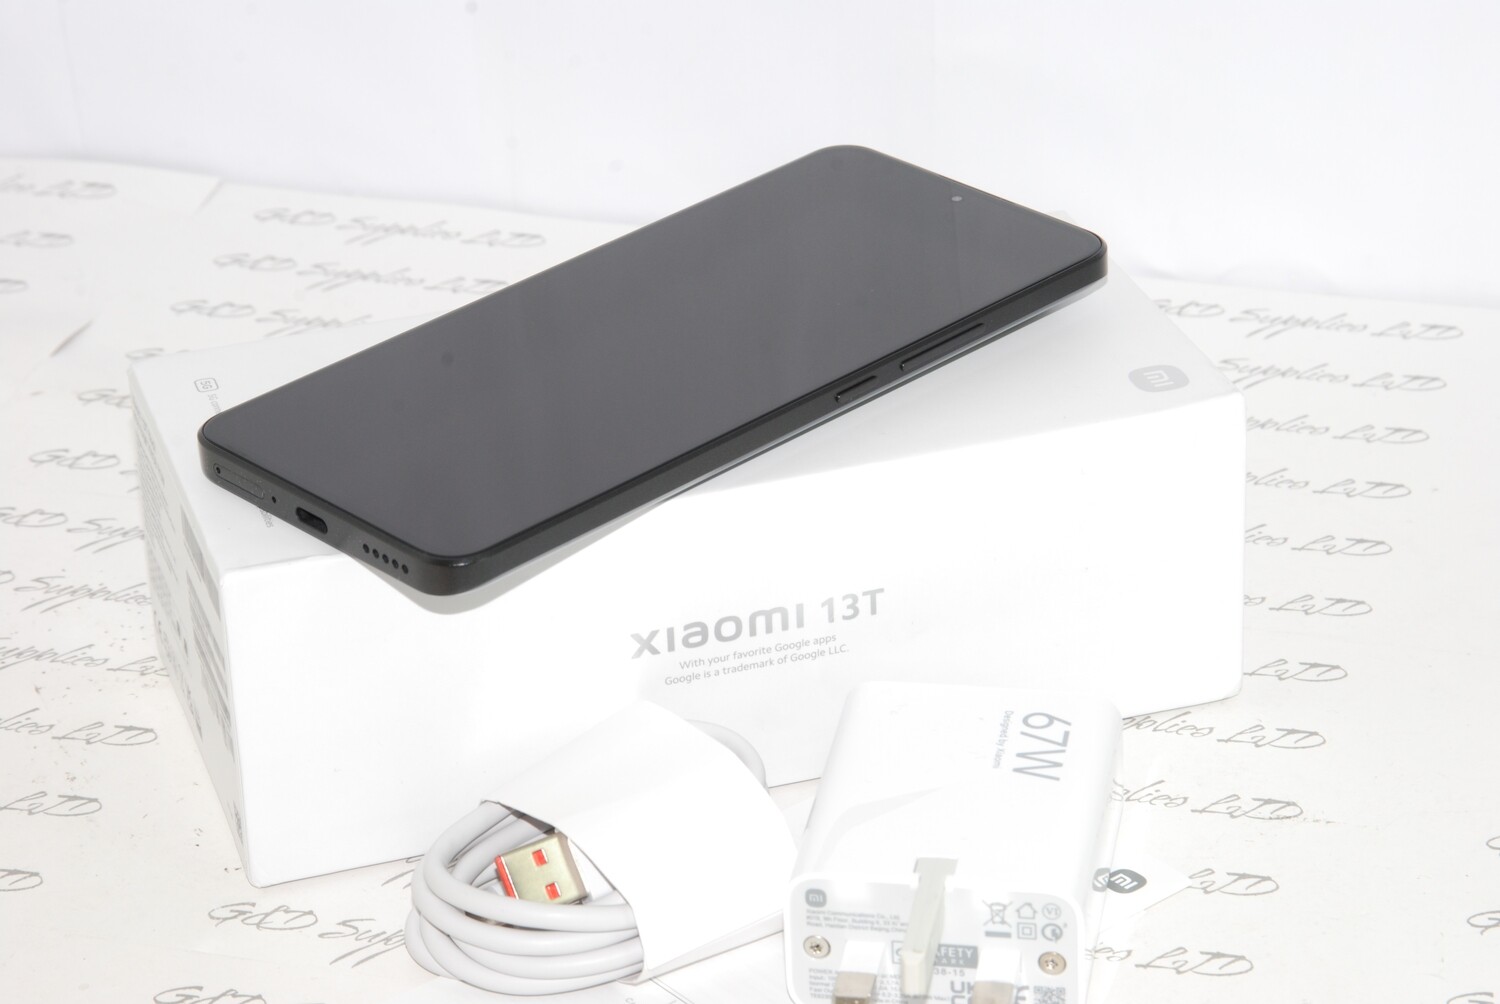 # Xiaomi 13T 256GB 8GB Dual SIM Unlocked Android Black new condition Mint condition UK version #